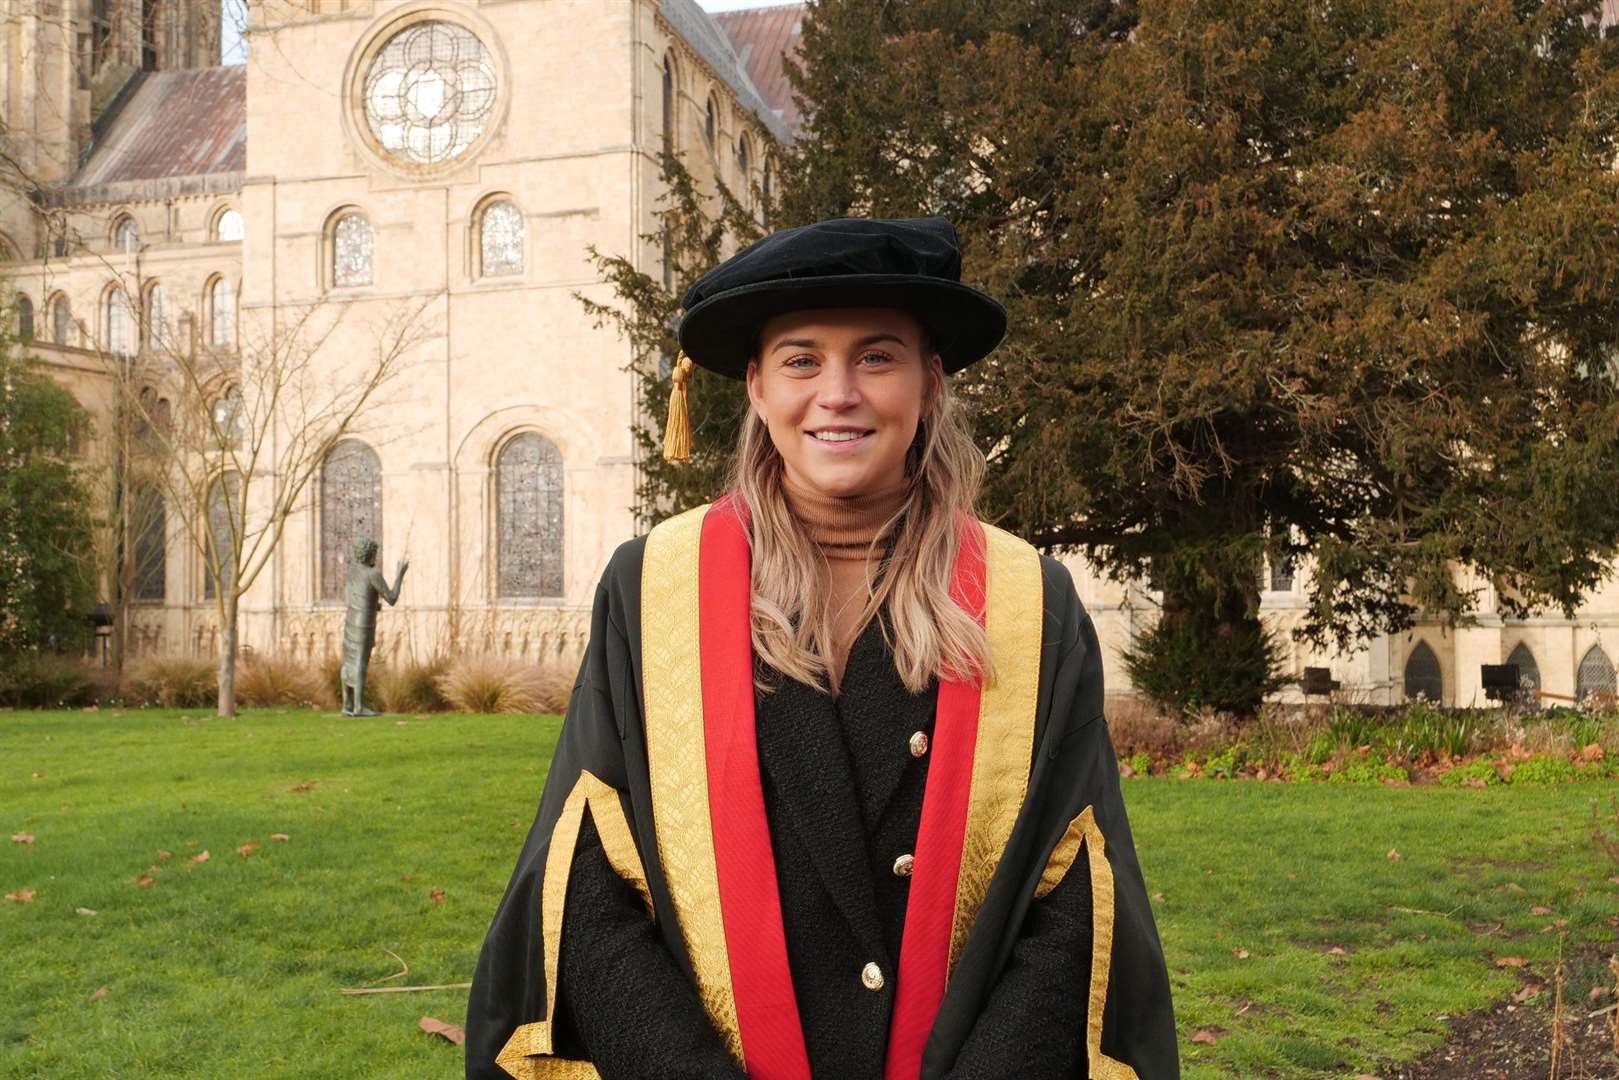 Dr Alessia Russo was given an honorary doctorate at Canterbury Christ Church University on Friday. Picture: @CanterburyCCUni